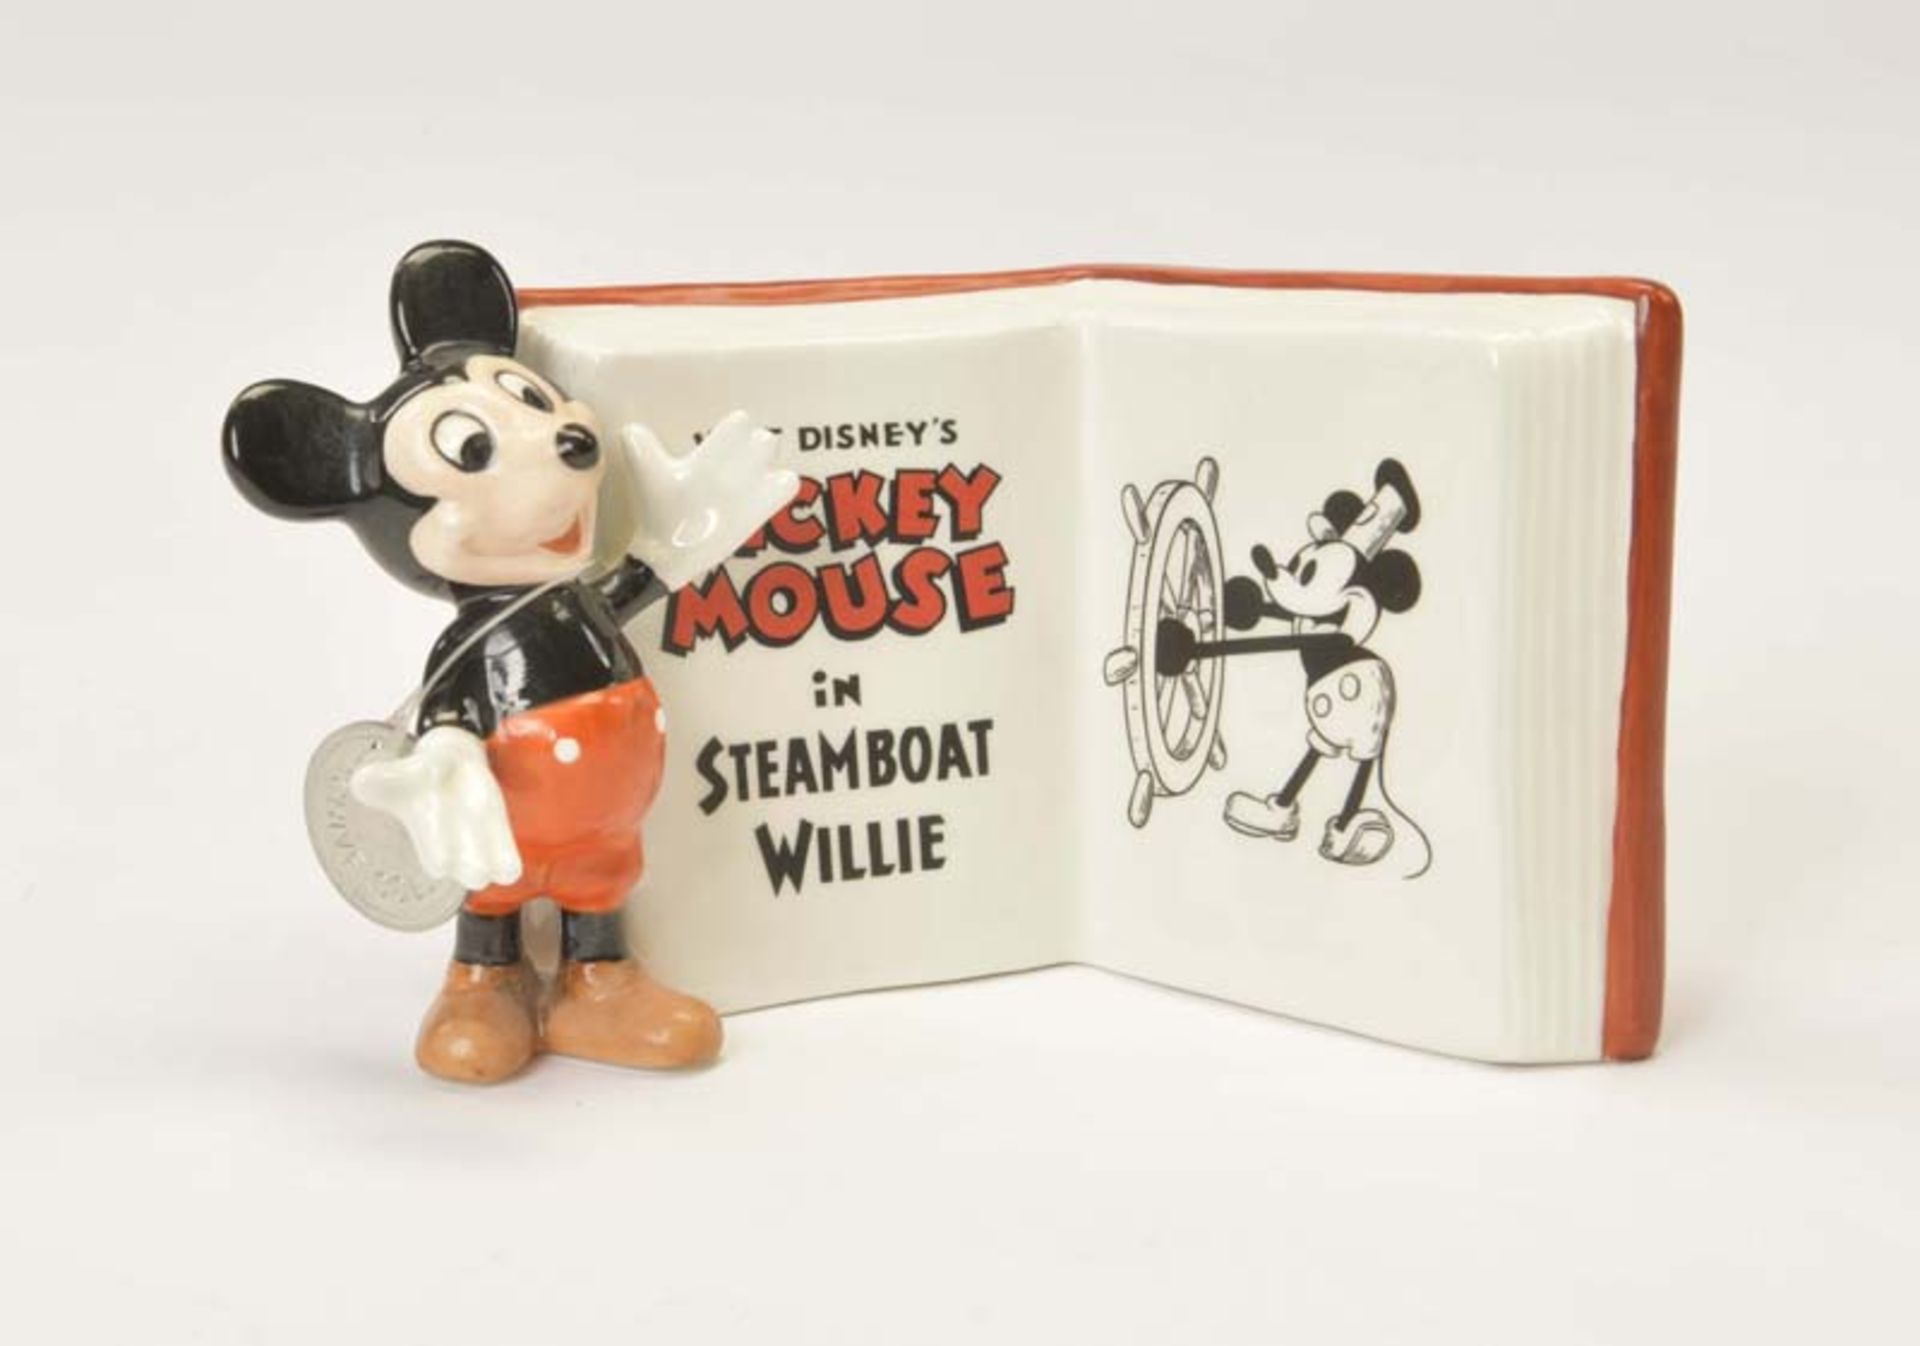 Goebel, "Mickey Mouse in Steamboot Willie", W.-Germany, out of porcelain, C 1